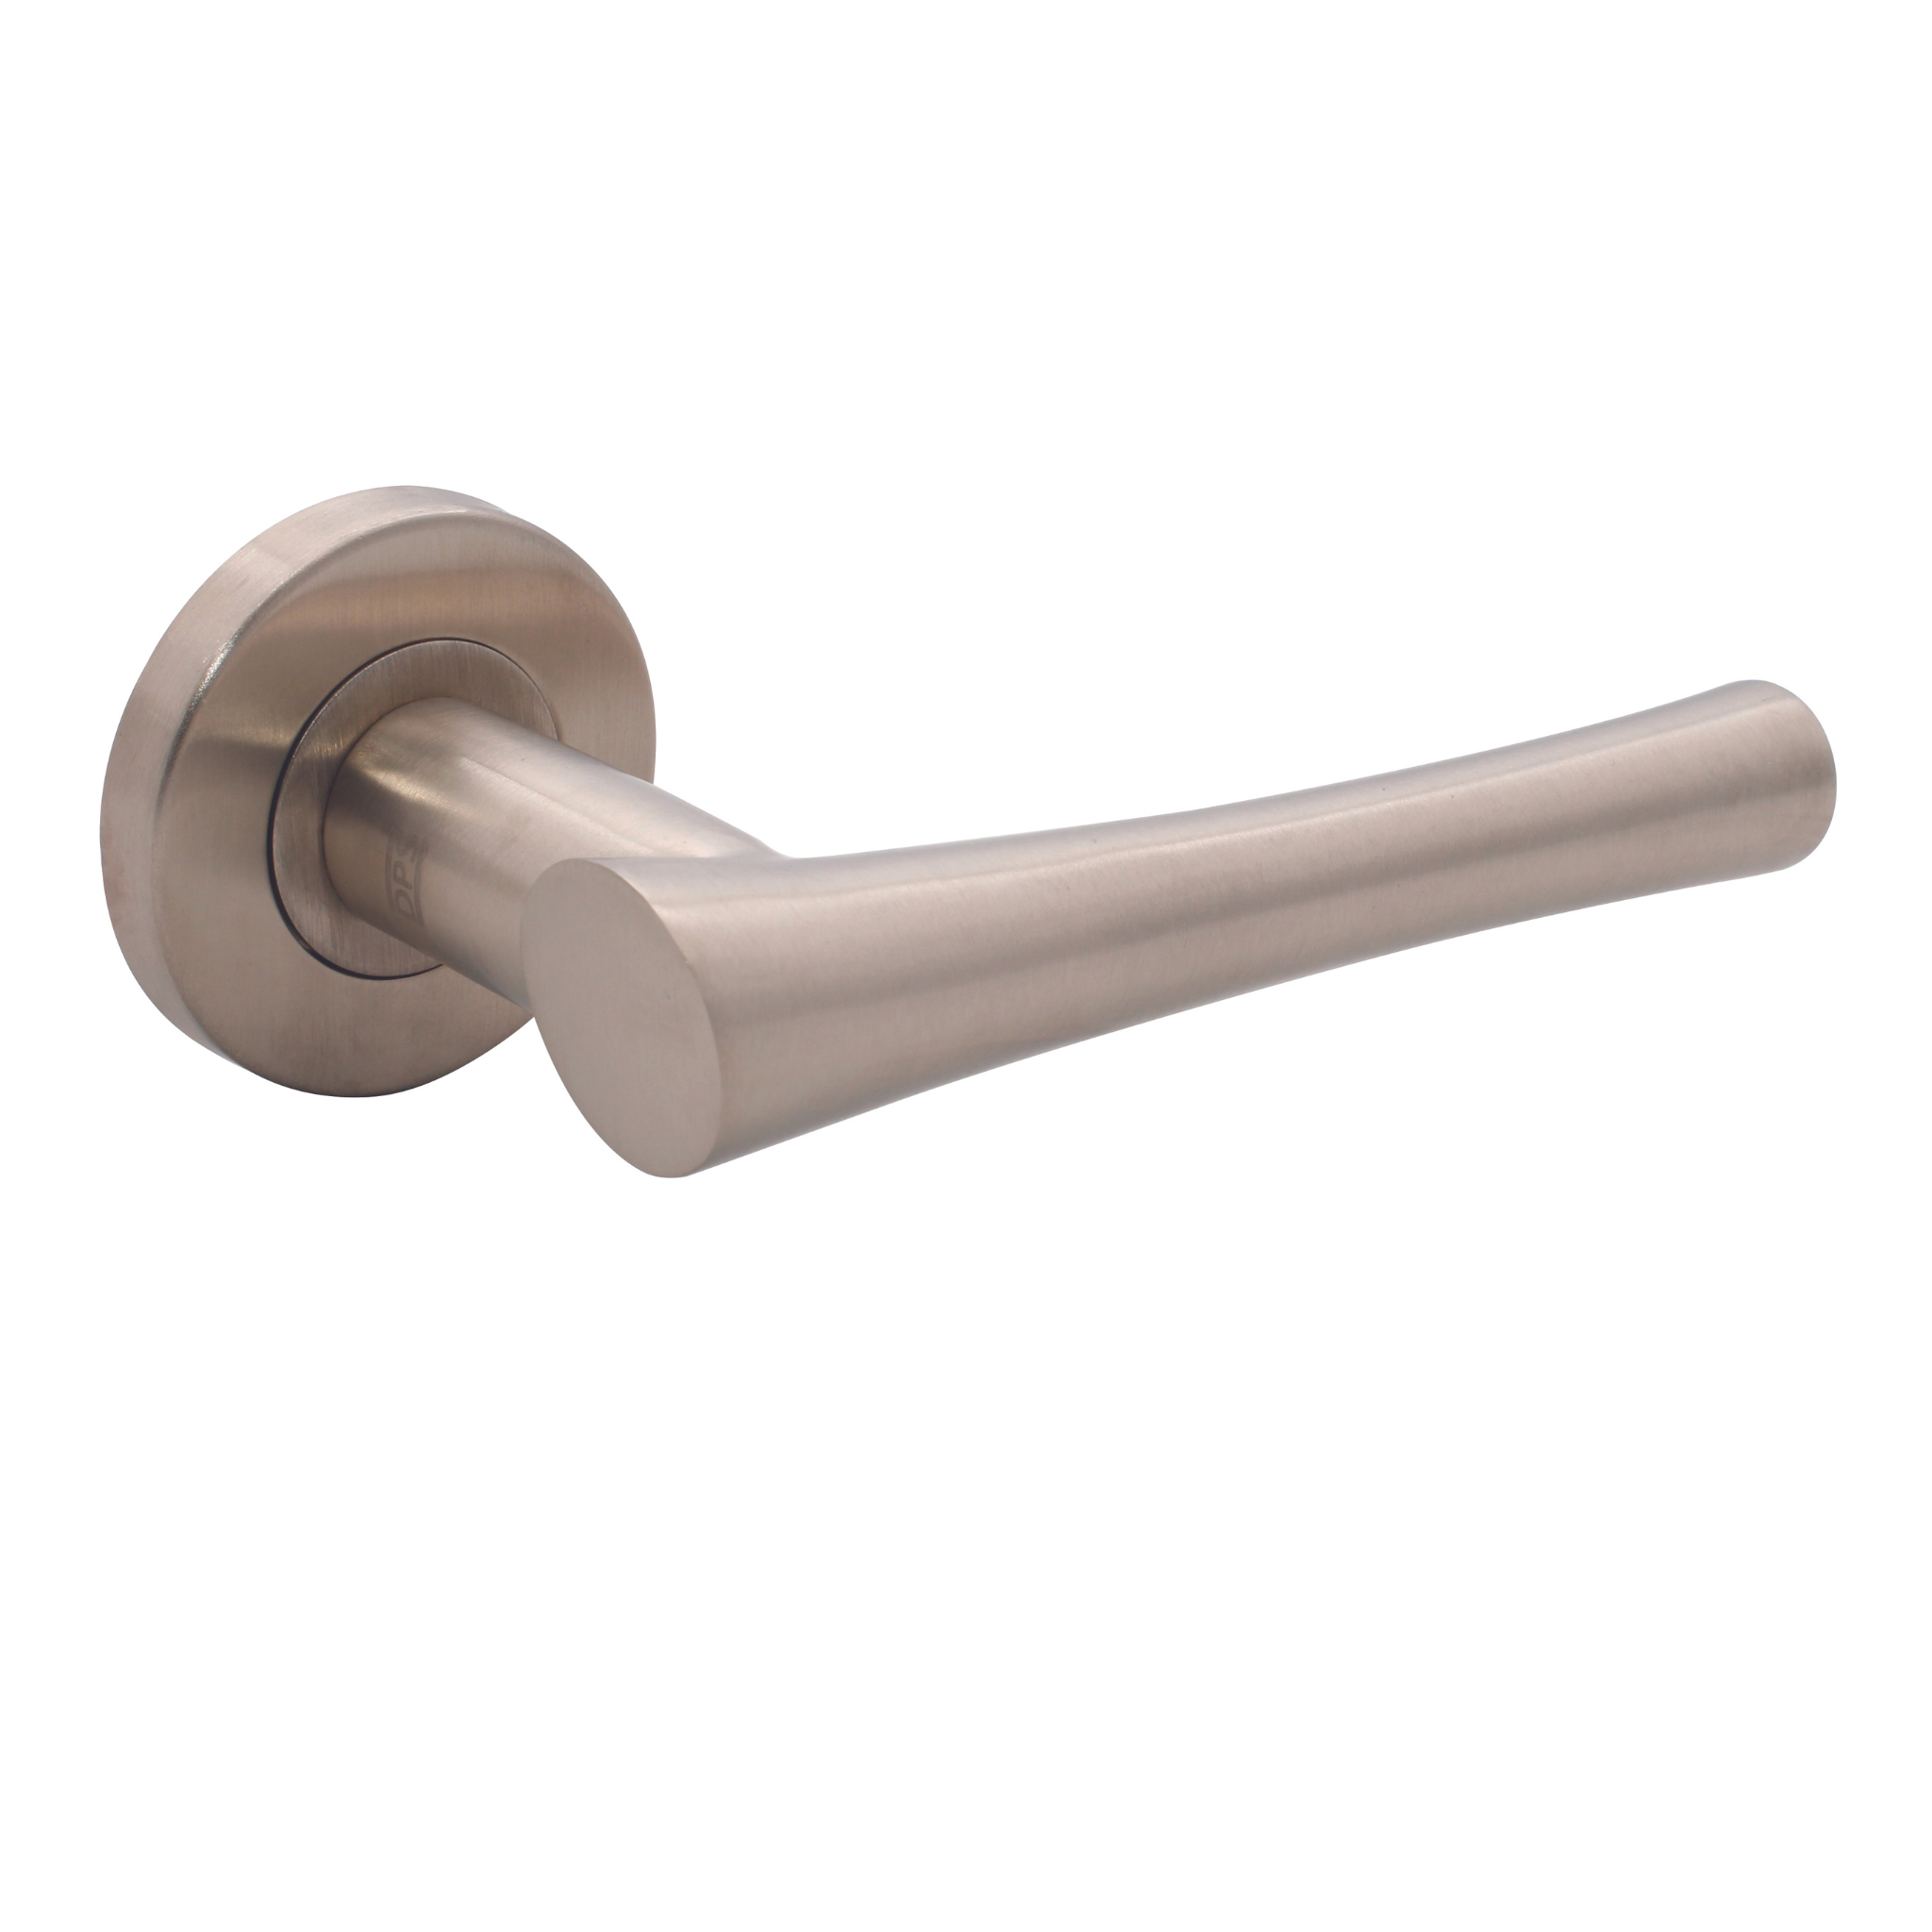 FS102.R._.TR, Lever Handles, Solid, On Round Rose, With Escutcheons, 138mm (l), Stainless Steel with Tarnish Resistant, CISA